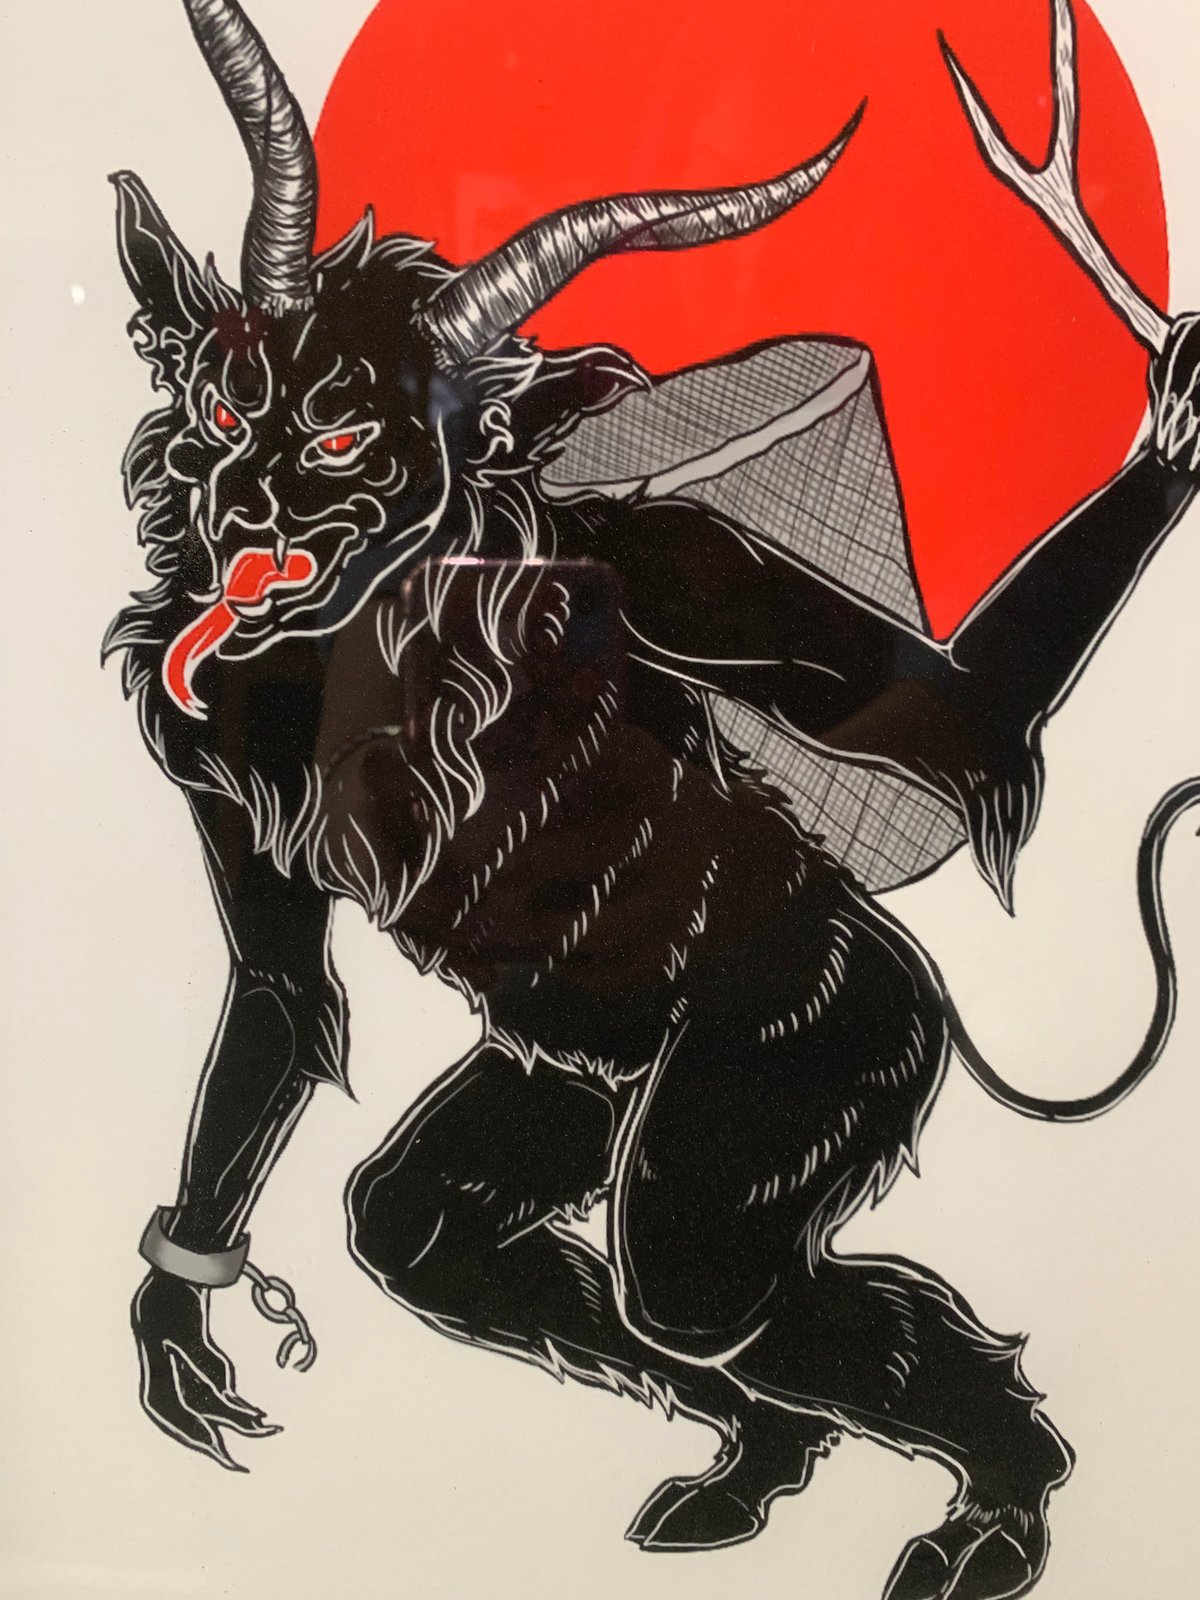 Image of Krampus by Adray